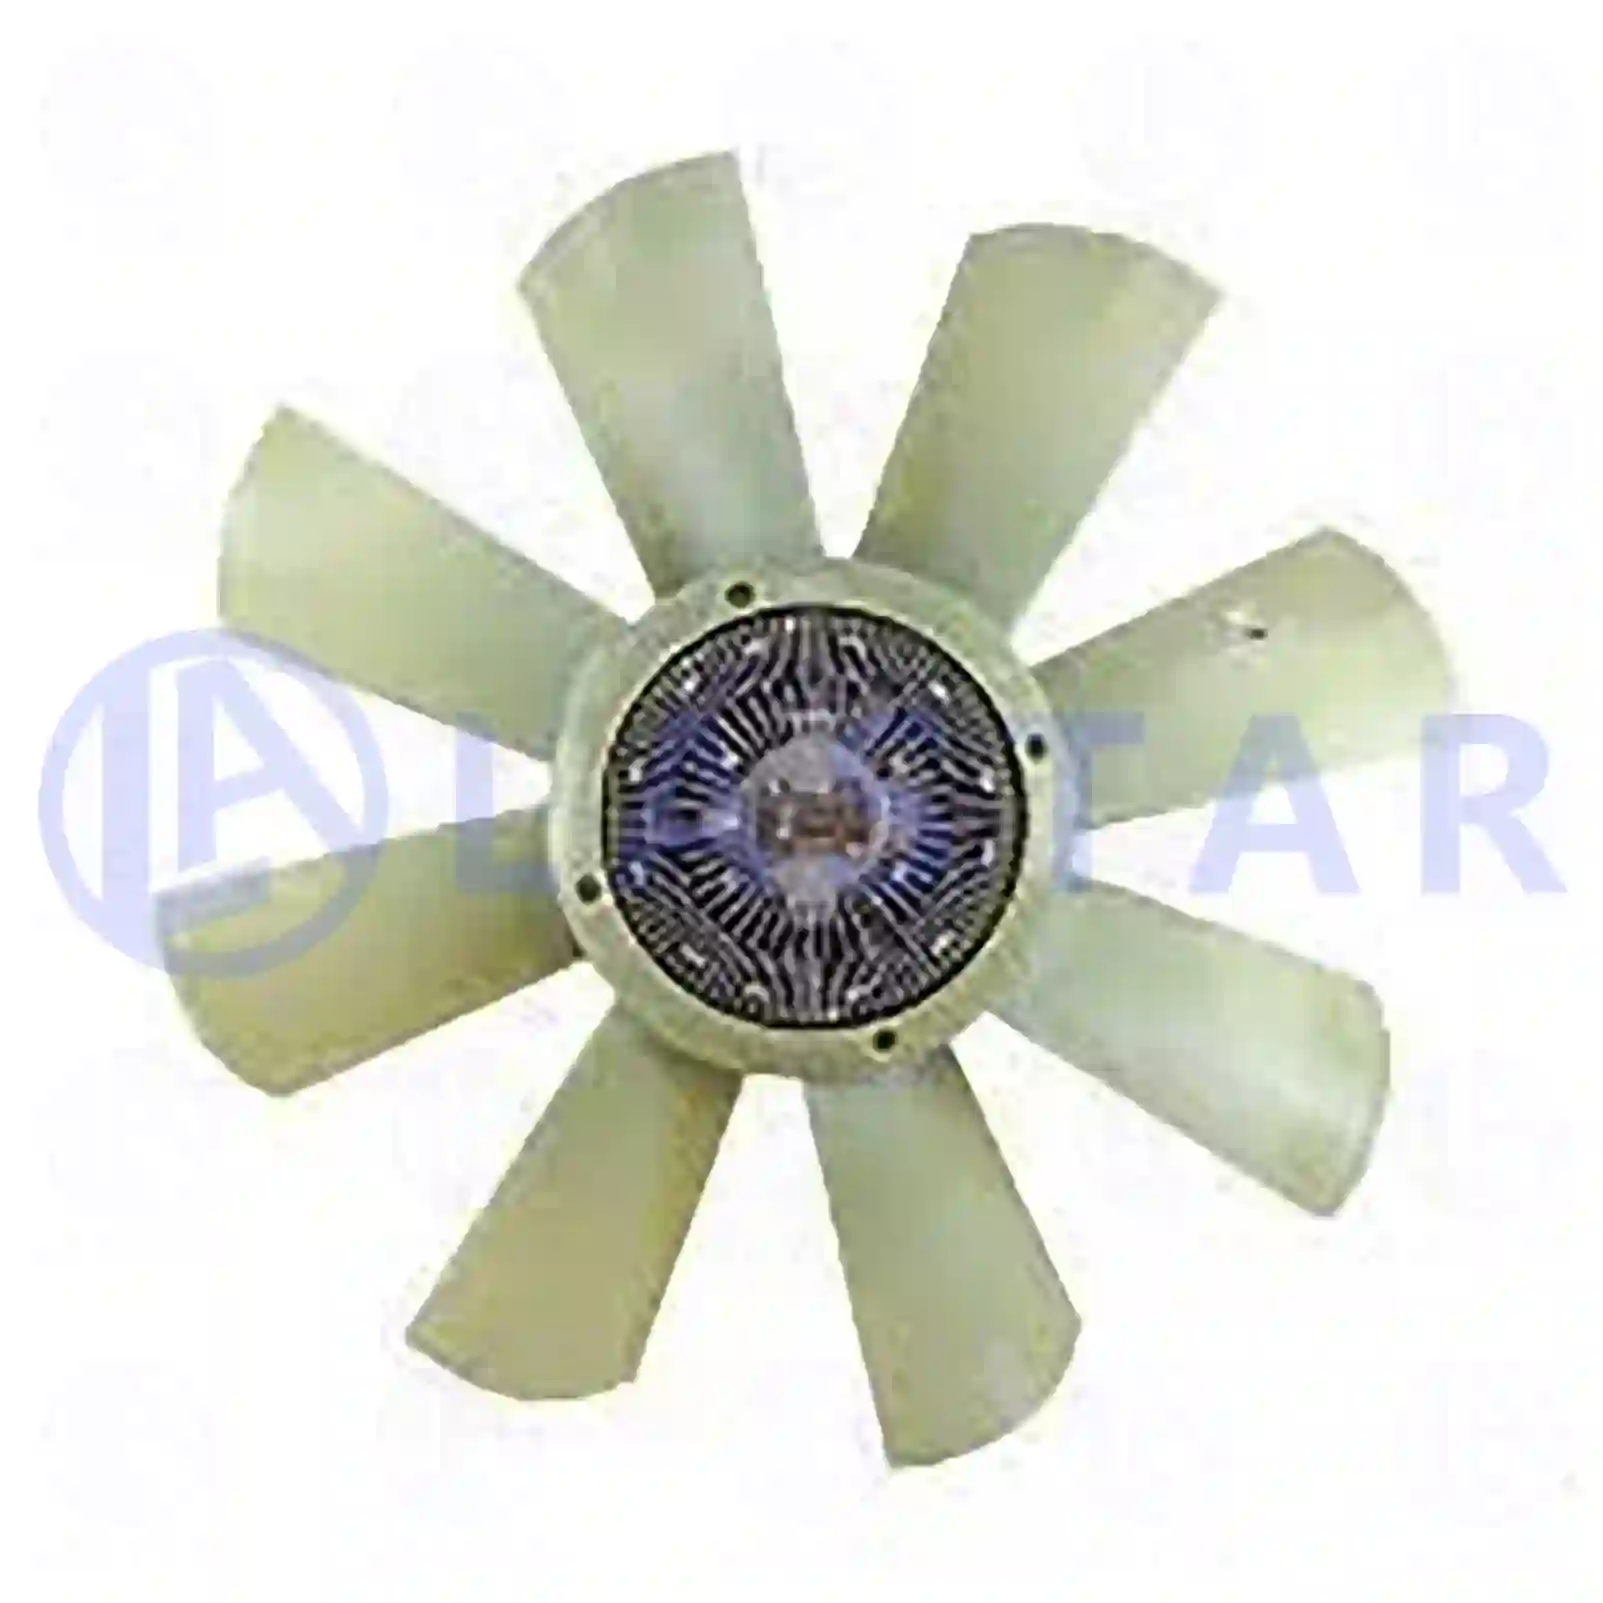 Fan with clutch, 77708816, 10571094, 10571095, 1368064, 1423891, 1571094, 1571095, 571094, 571095 ||  77708816 Lastar Spare Part | Truck Spare Parts, Auotomotive Spare Parts Fan with clutch, 77708816, 10571094, 10571095, 1368064, 1423891, 1571094, 1571095, 571094, 571095 ||  77708816 Lastar Spare Part | Truck Spare Parts, Auotomotive Spare Parts